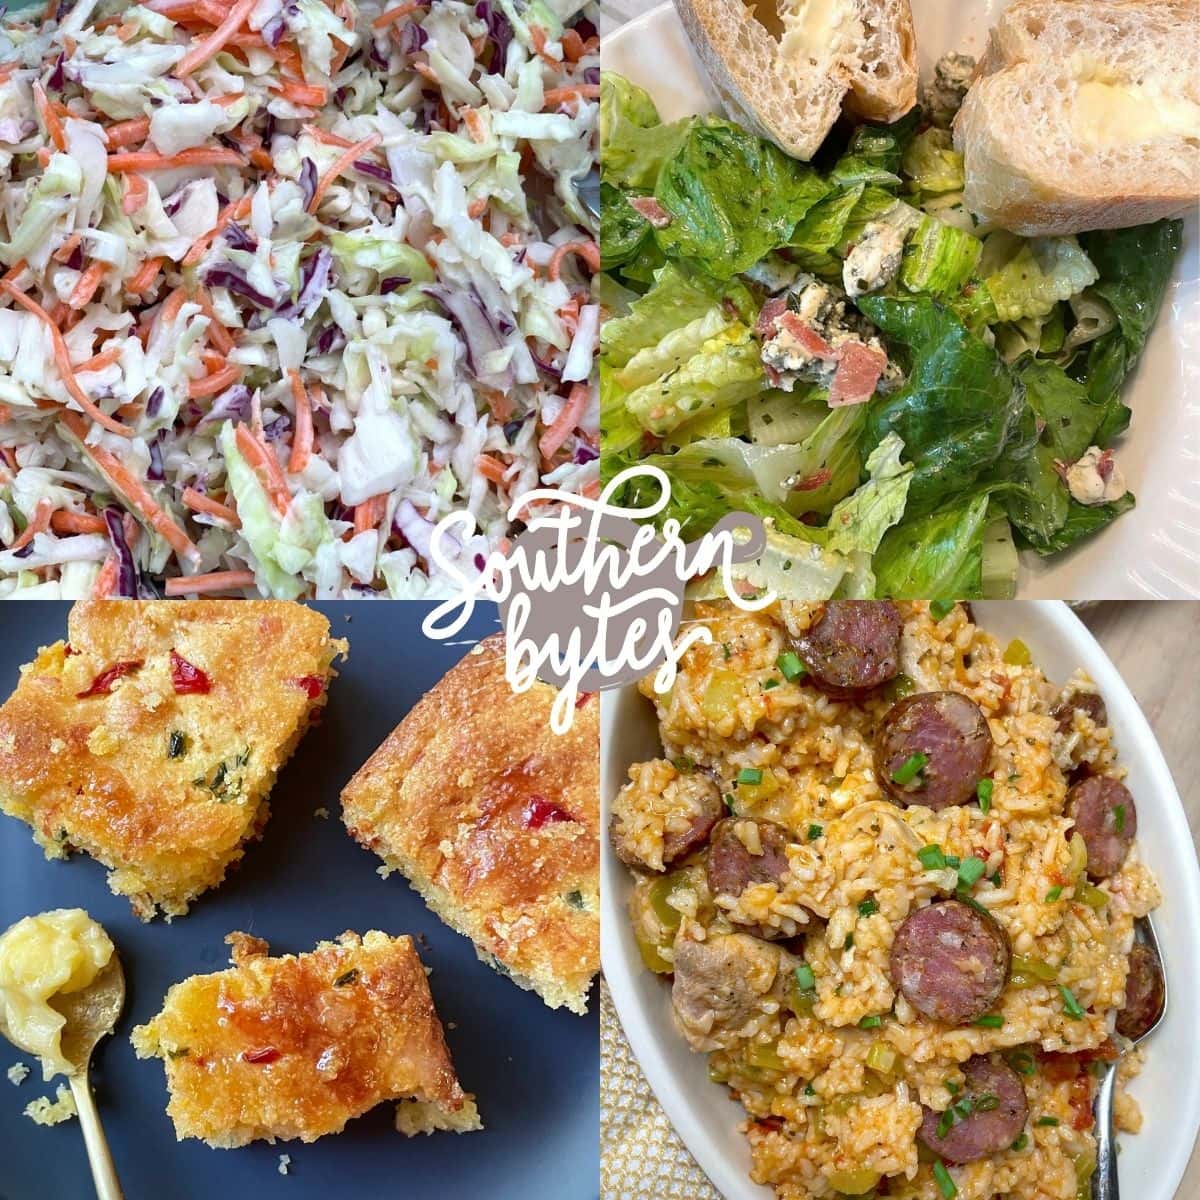 A collage of images showing sides to serve with jambalaya; cornbread, a salad, and coleslaw.